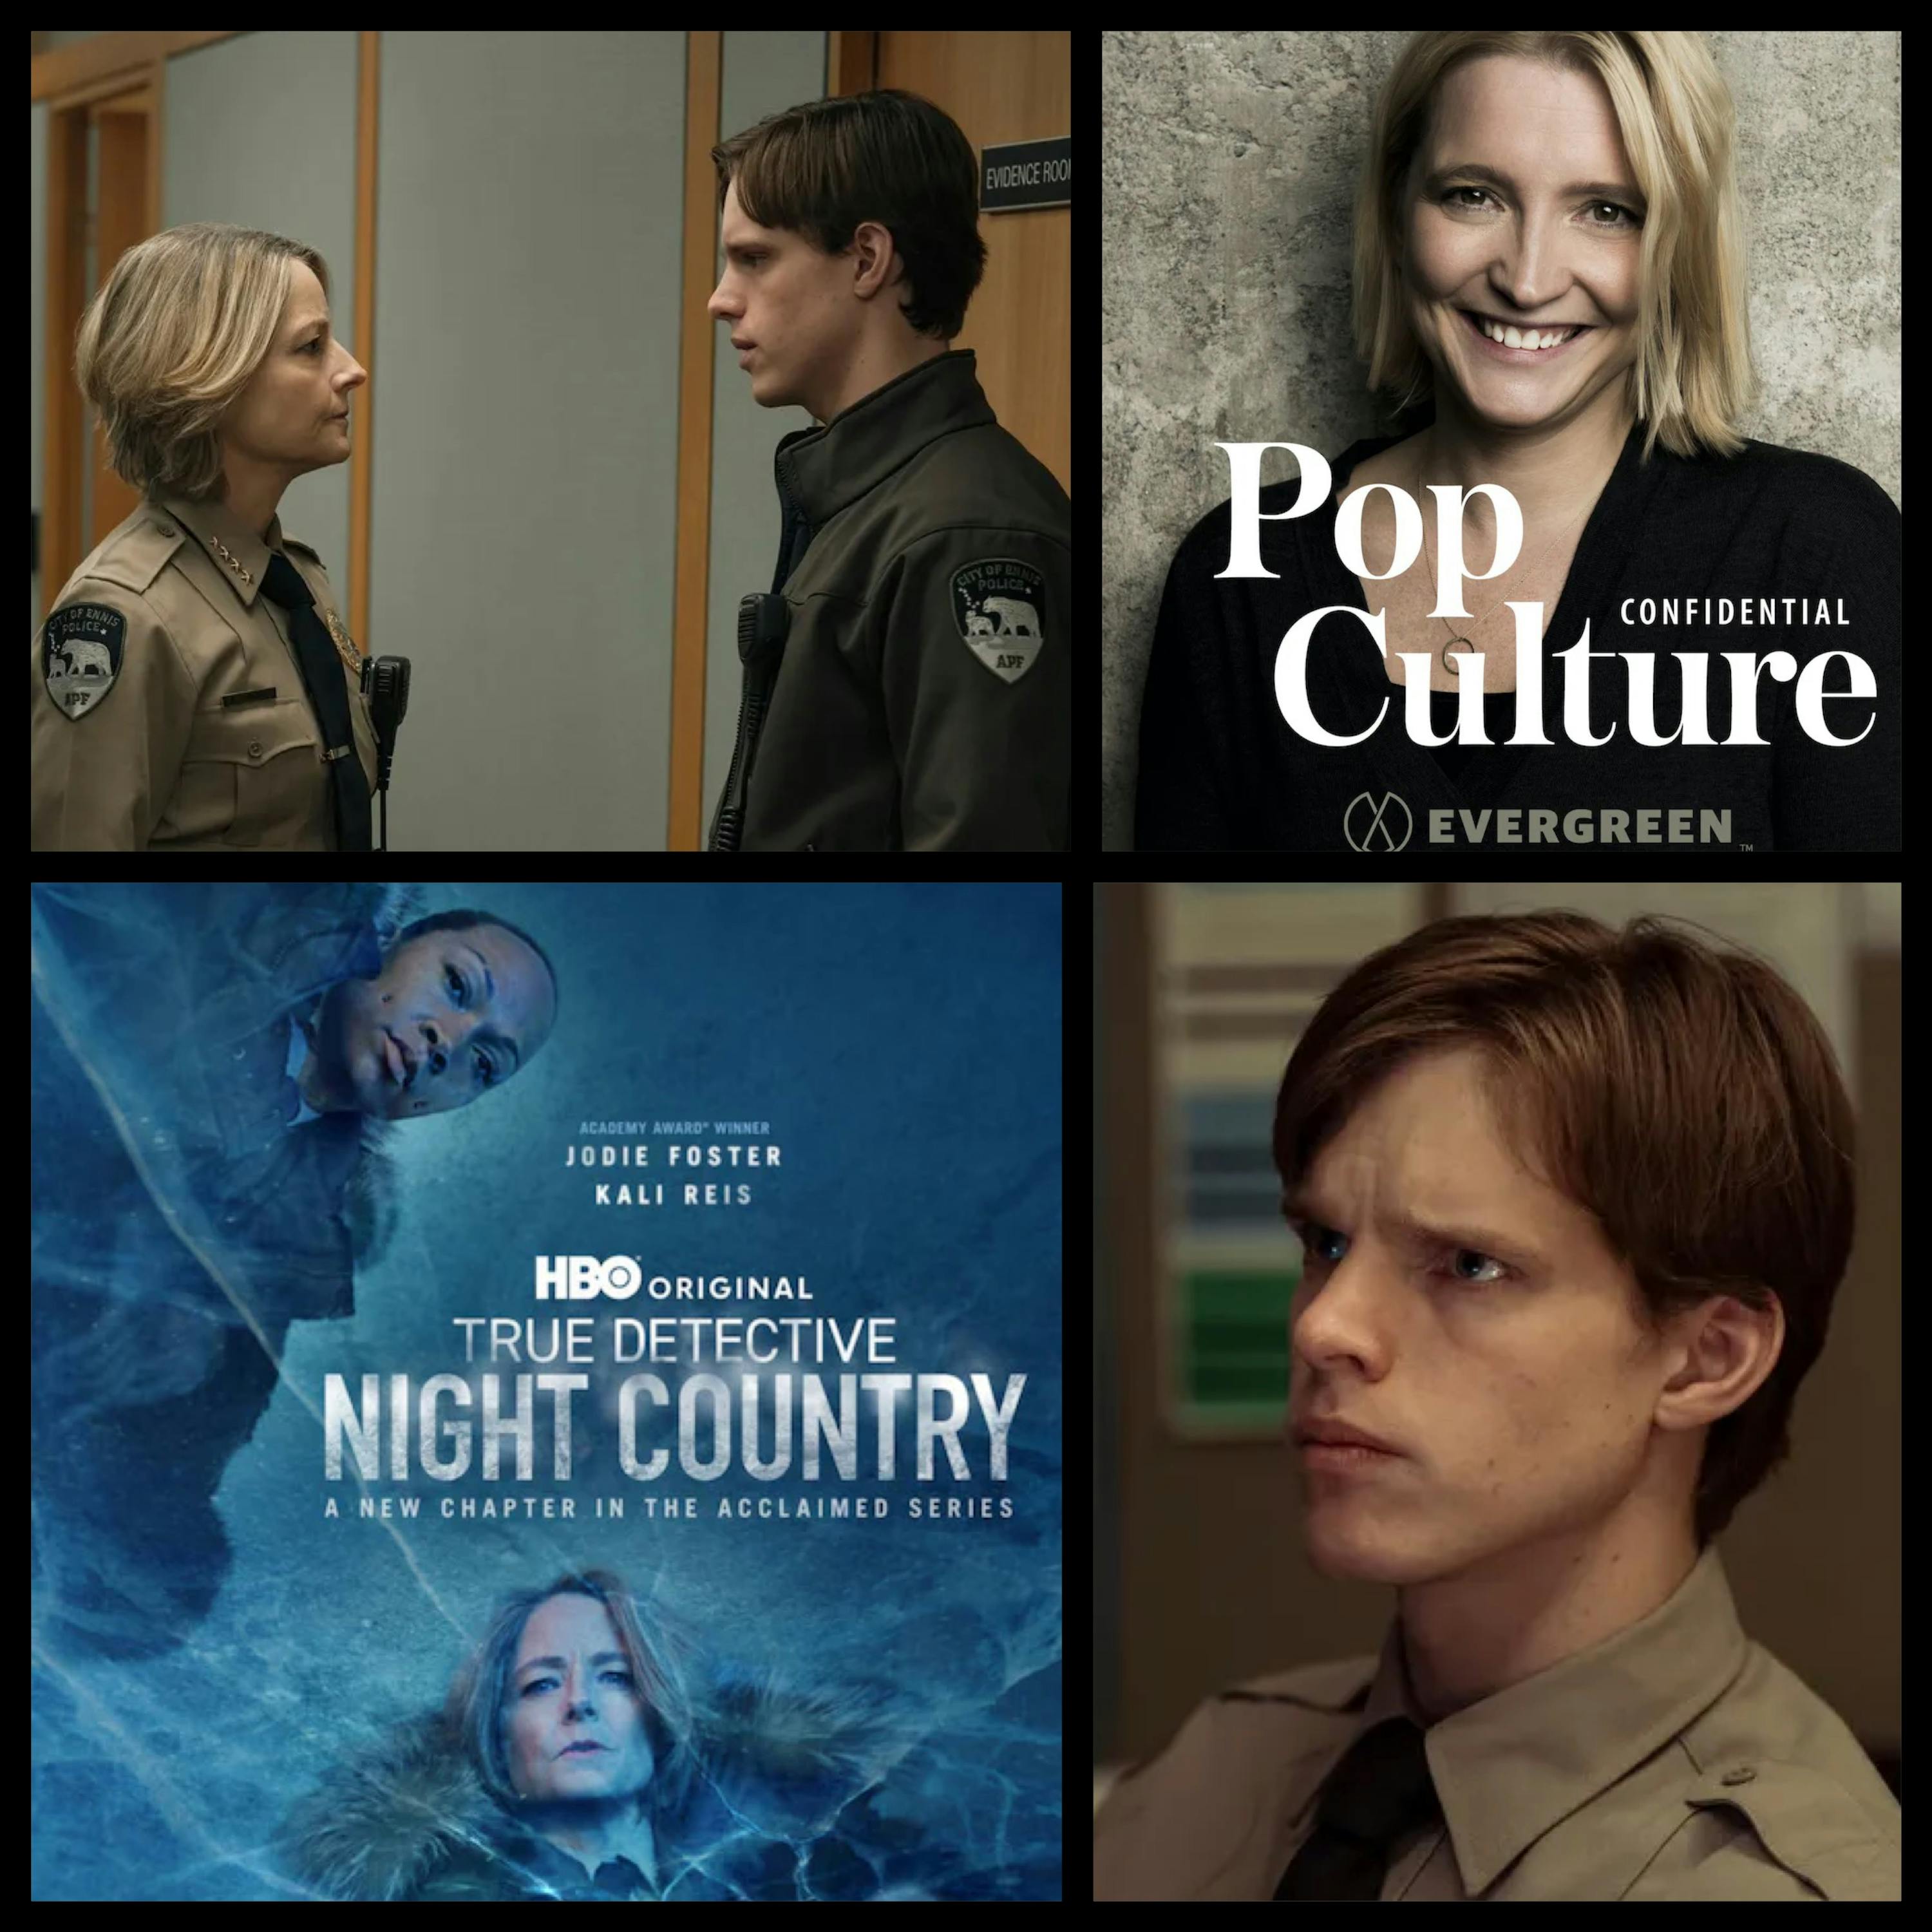 393: Finn Bennett ('Peter Prior') on 'True Detective: Night Country', the incredible finale, the best fan theories, working with Jodie Foster and more.